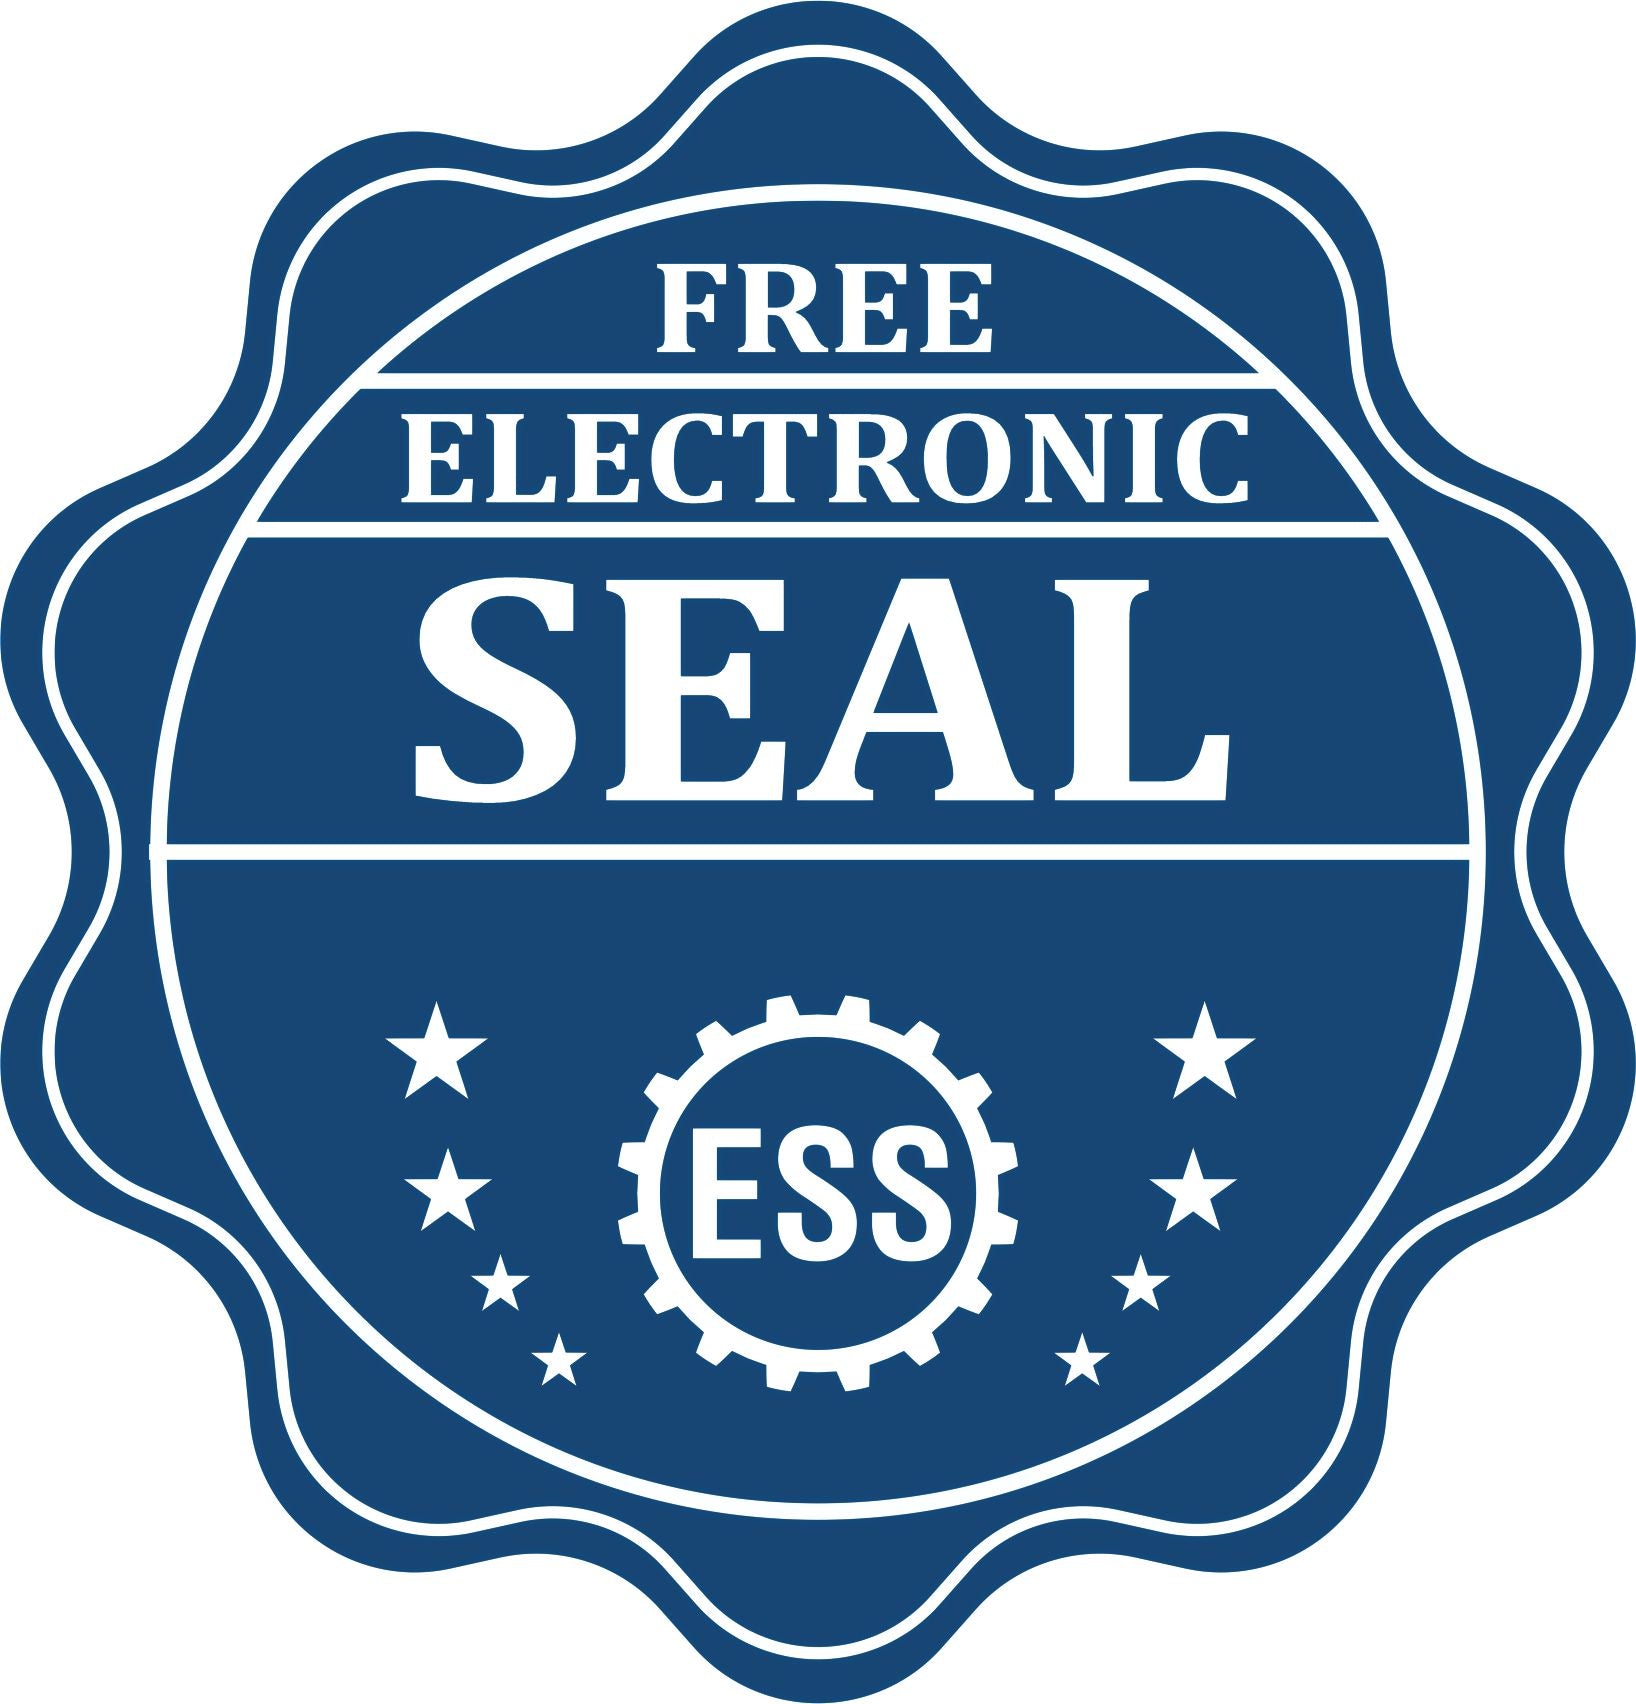 A badge showing a free electronic seal for the Kentucky Desk Landscape Architectural Seal Embosser with stars and the ESS gear on the emblem.